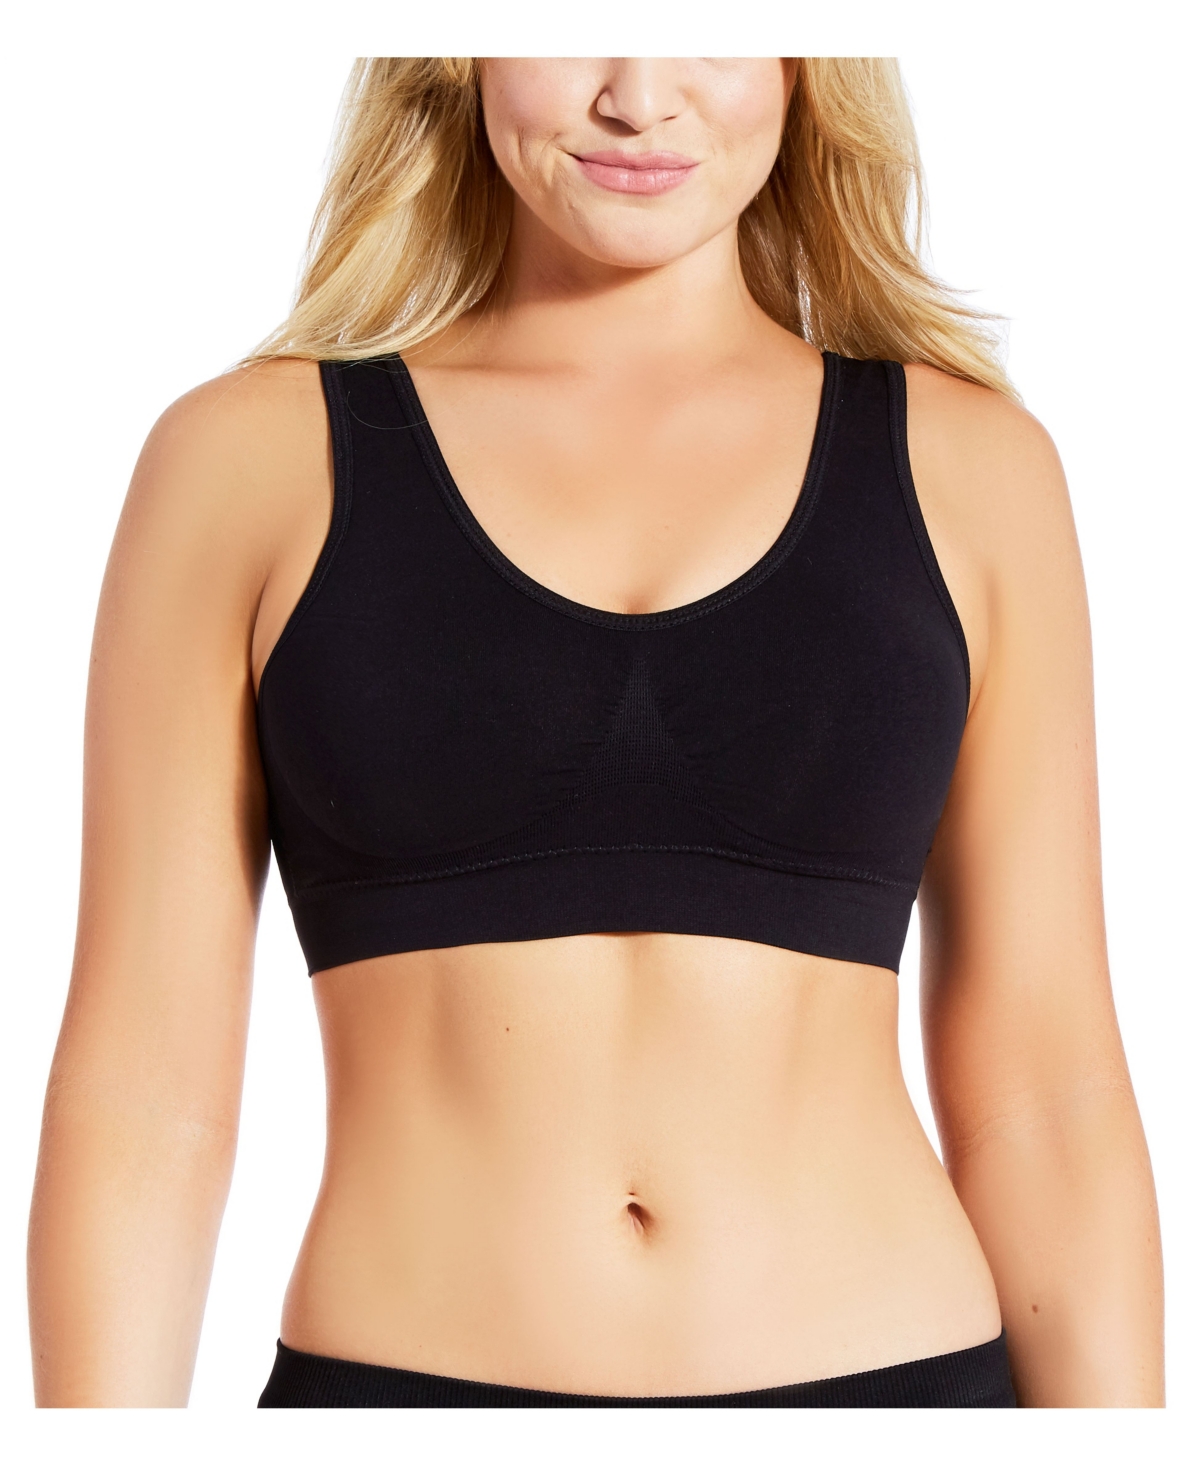 Women's Seamless 1 Piece Push-up Bra with No Hooks and Wires - Taupe